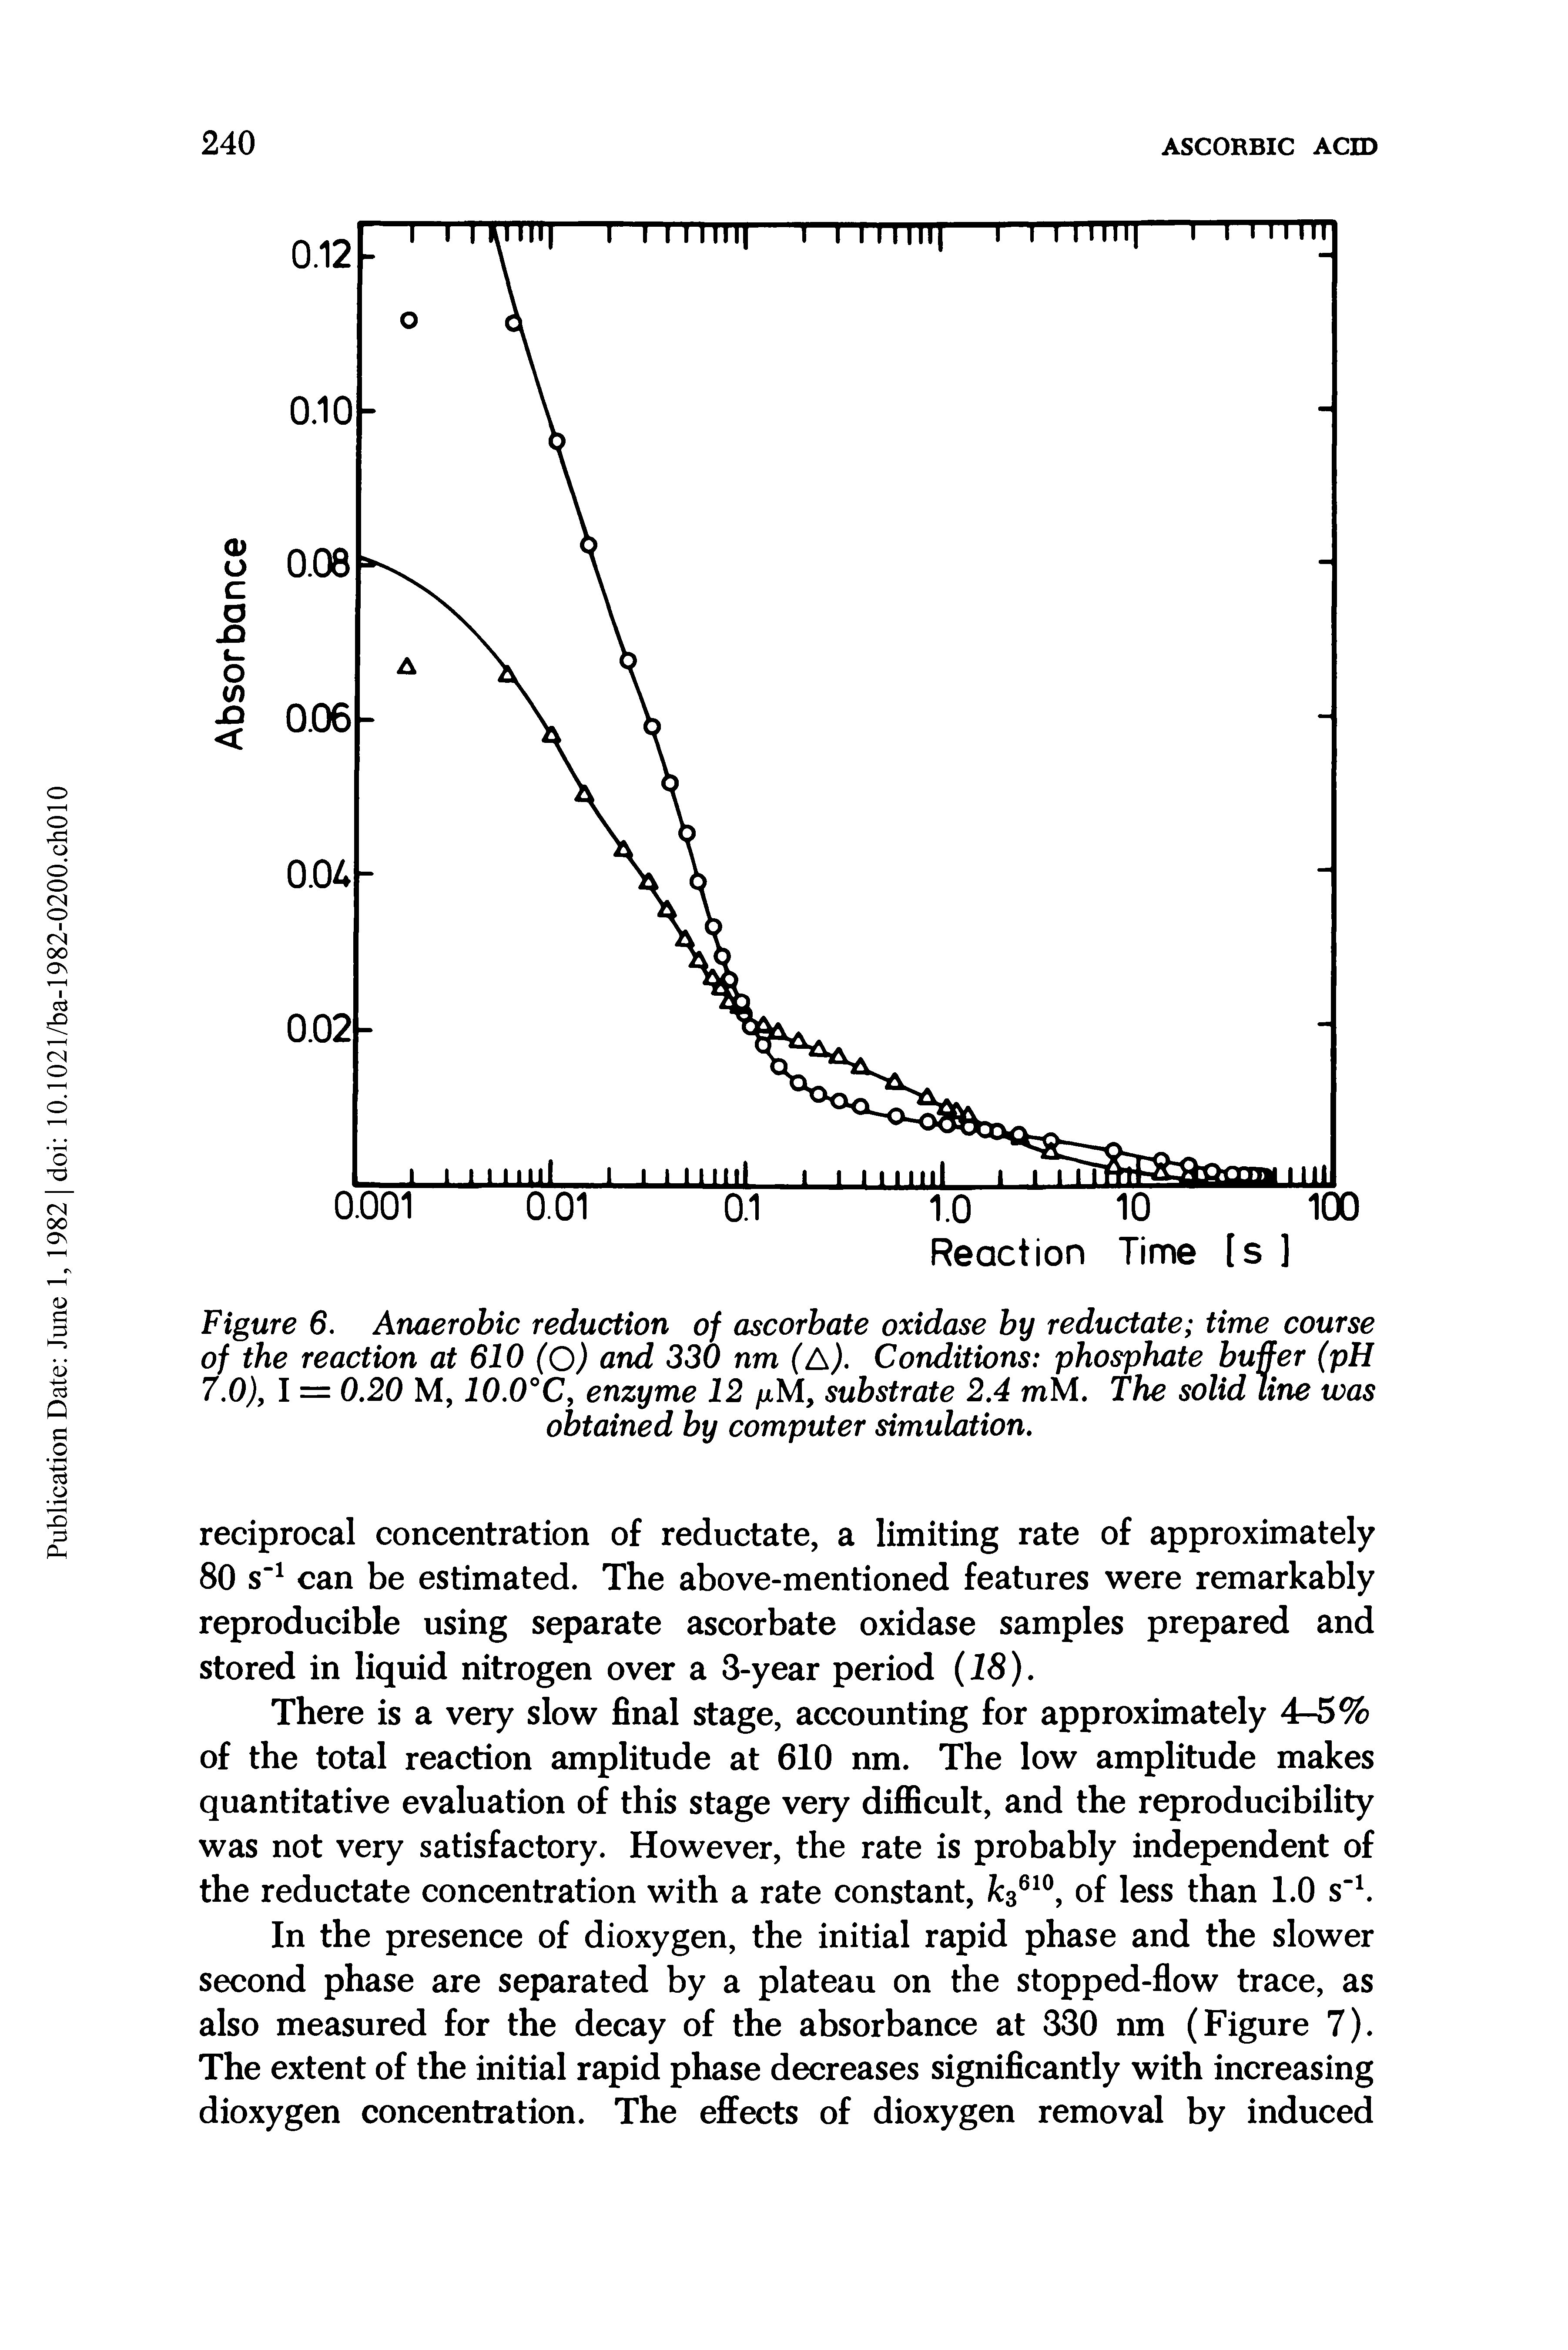 Figure 6. Anaerobic reduction of ascorbate oxidase by reductate time course of the reaction at 610 (O) and 330 nm (A). Conditions phosphate buffer (pH 7.0), I = 0.20 M, 10.0°C, enzyme 12 fxM, substrate 2.4 mM. The solid Line was obtained by computer simulation.